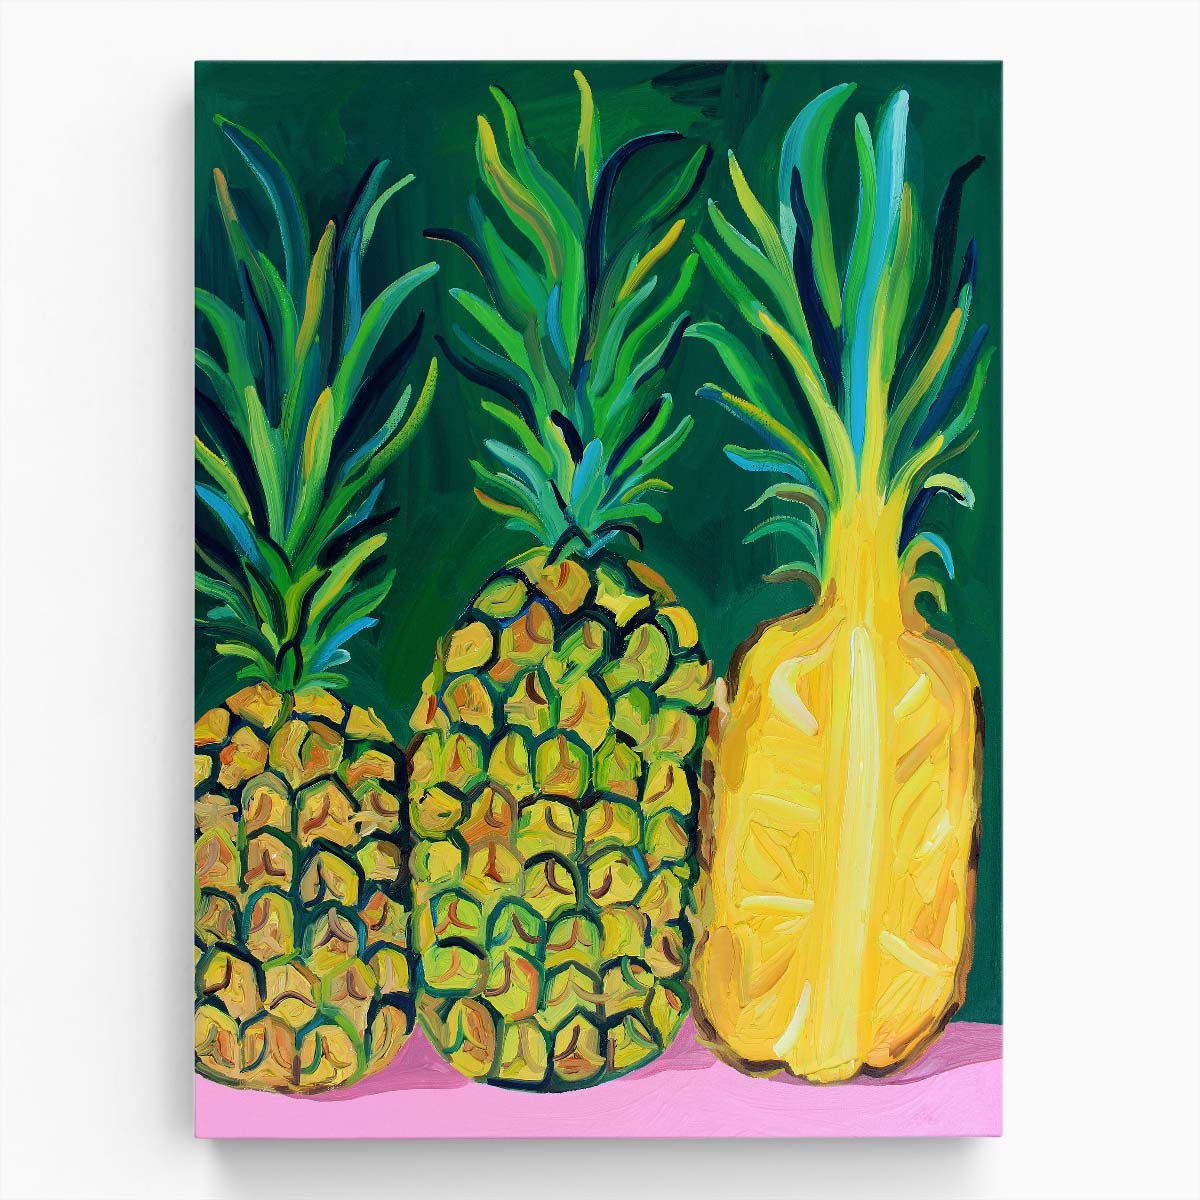 Colorful Pineapple Fruit Illustration for Kitchen Wall Art by Luxuriance Designs, made in USA